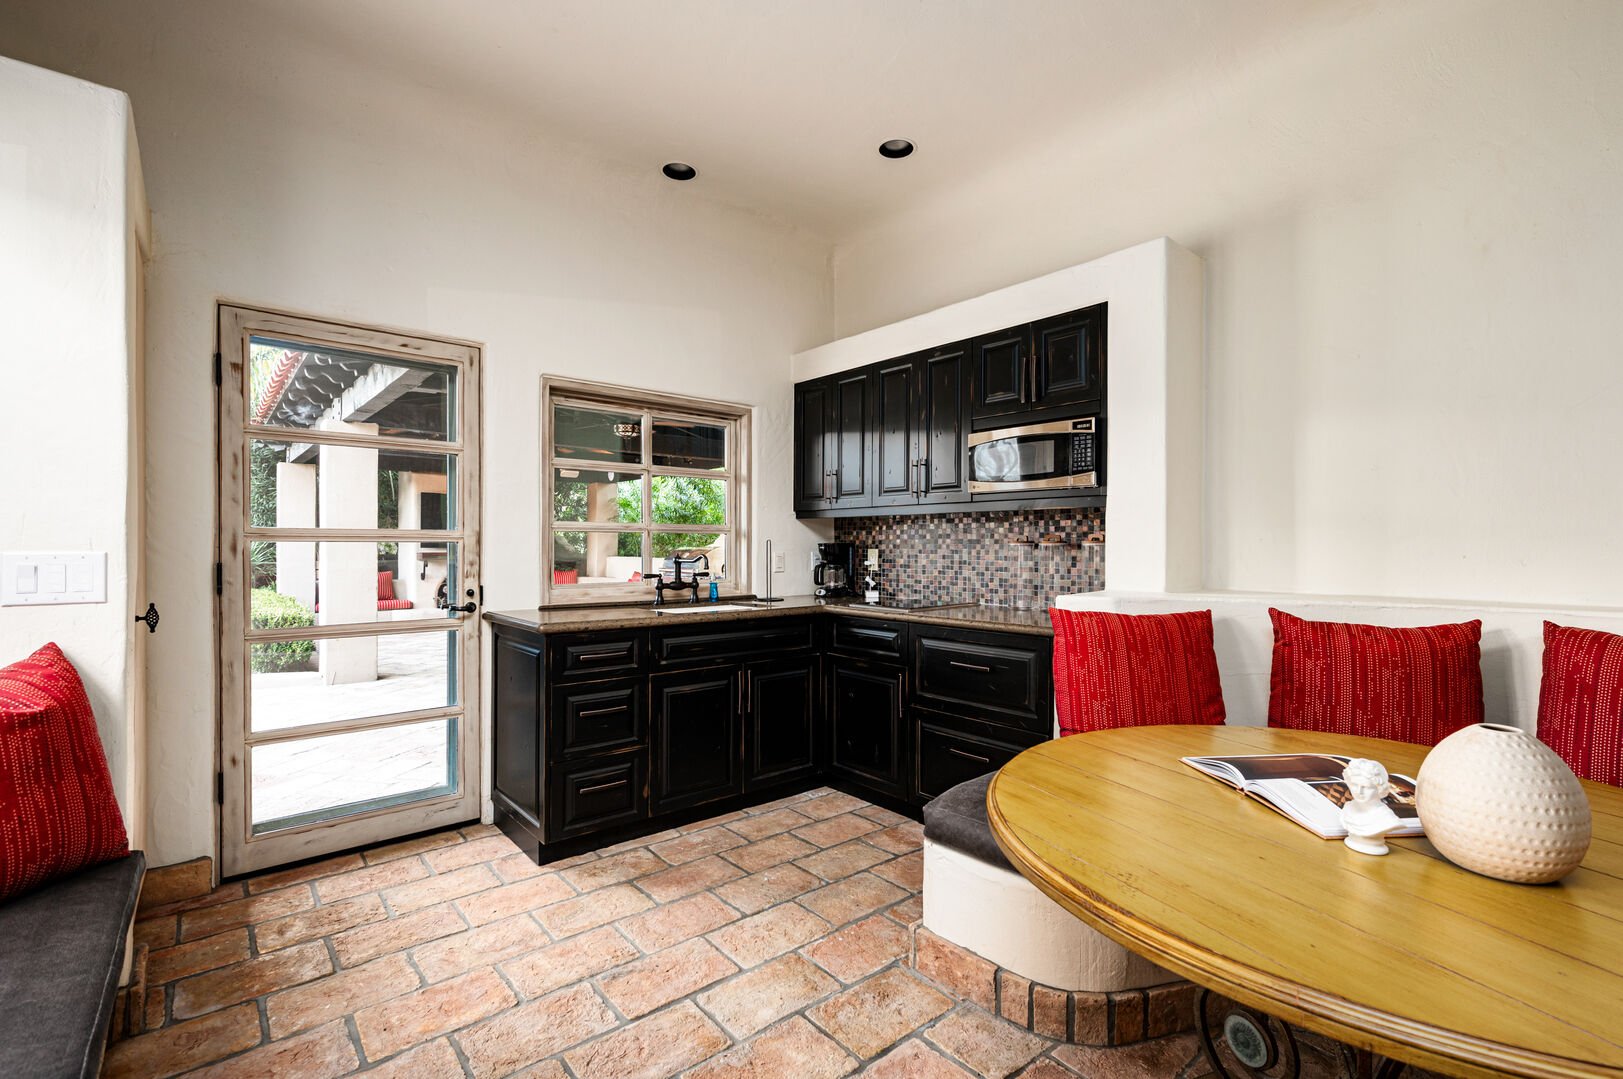 A mini kitchen available in the casita with a breakfast nook.